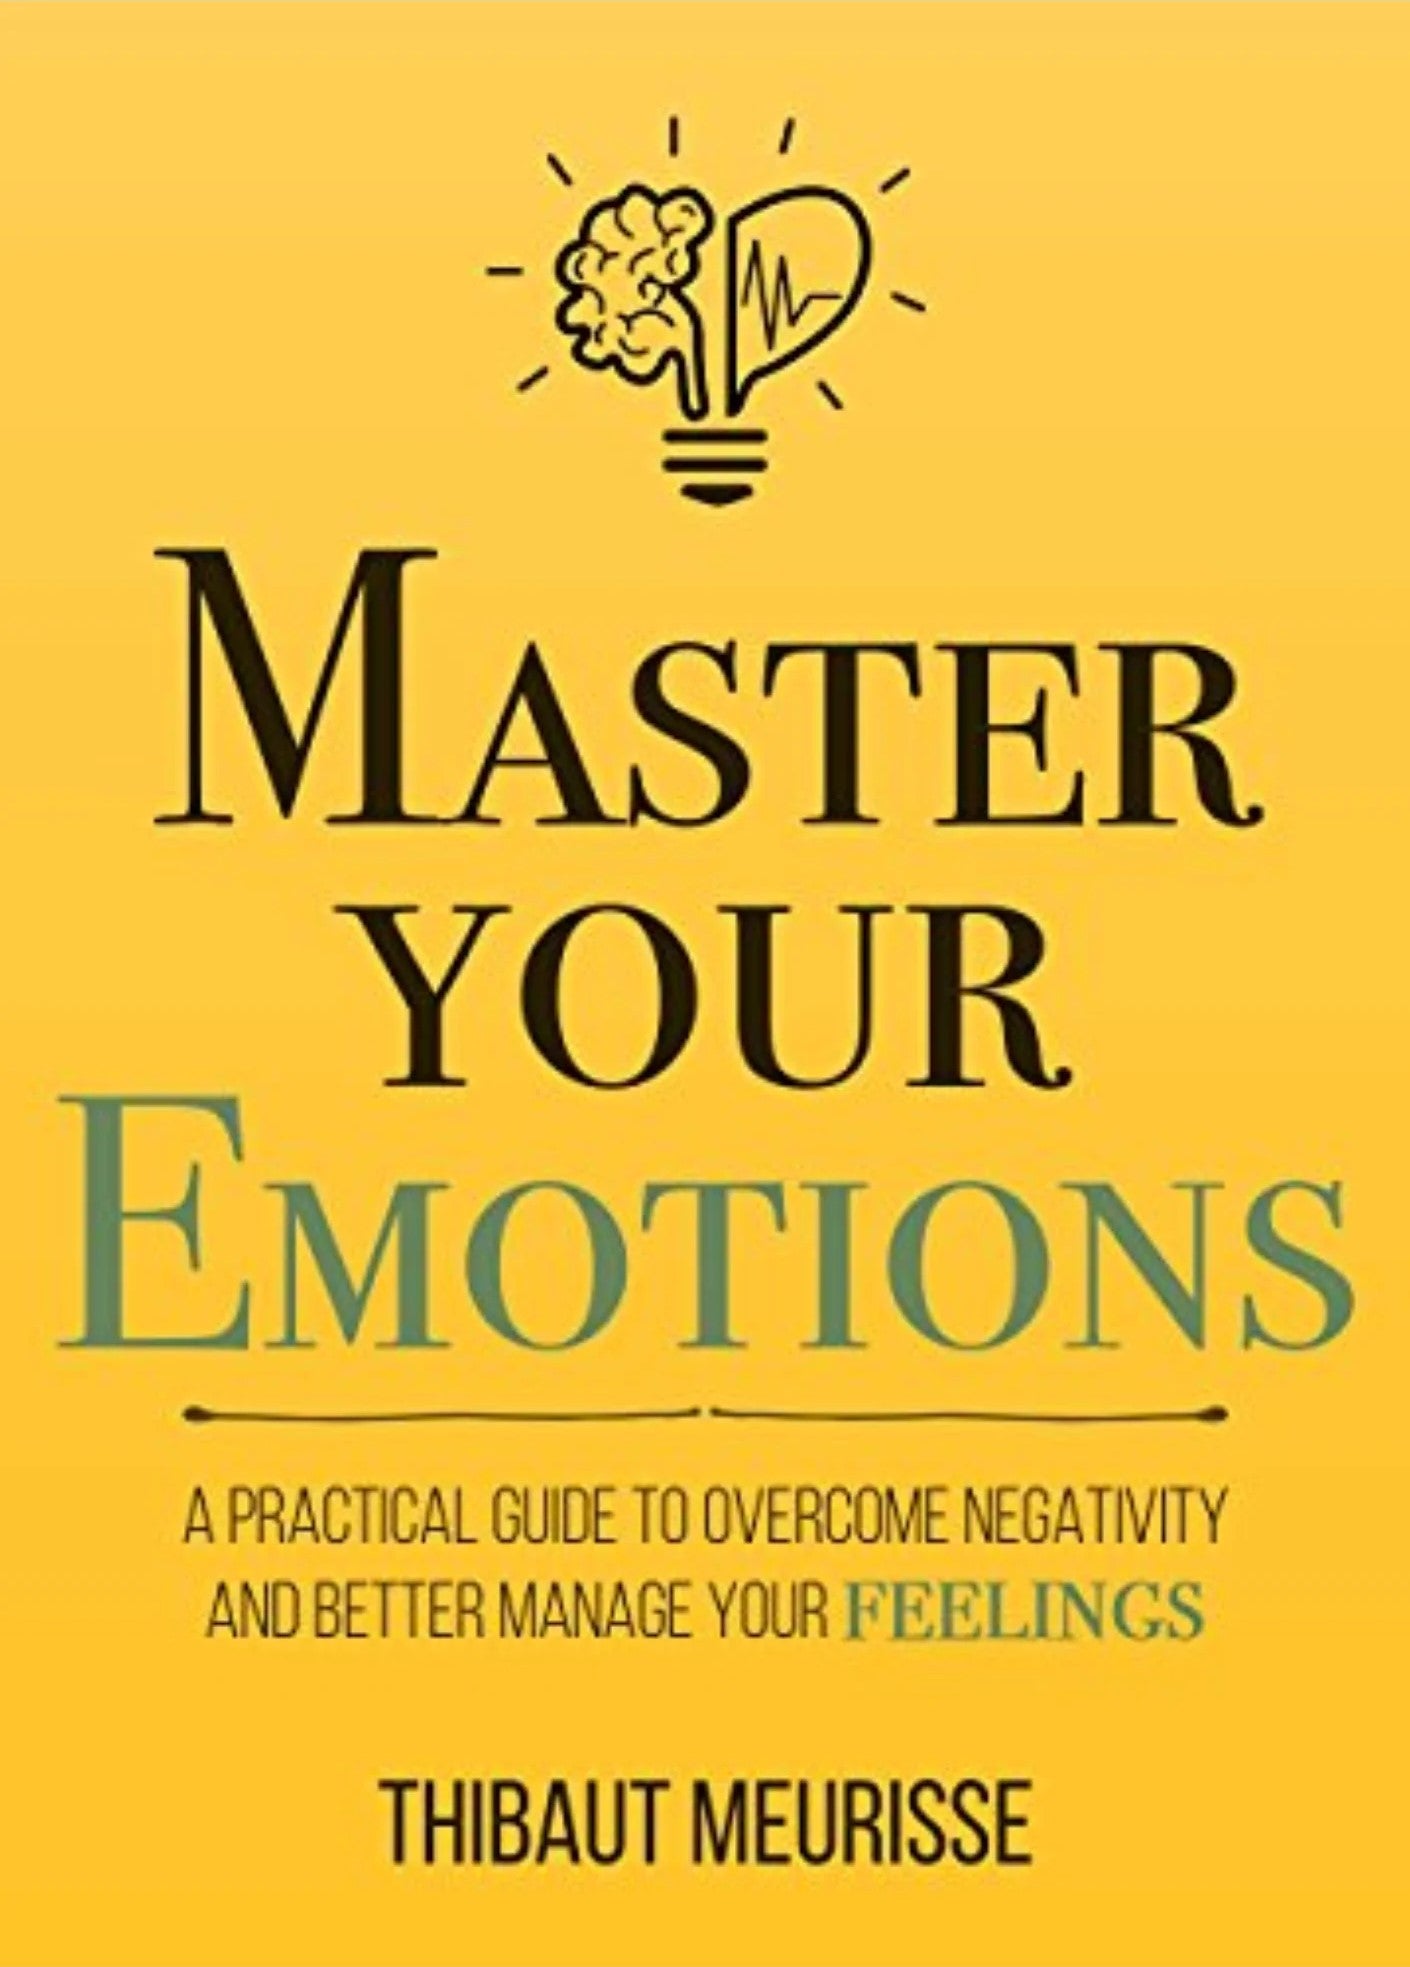 MASTER YOUR EMOTIONS By THIBAUT MEURISSE